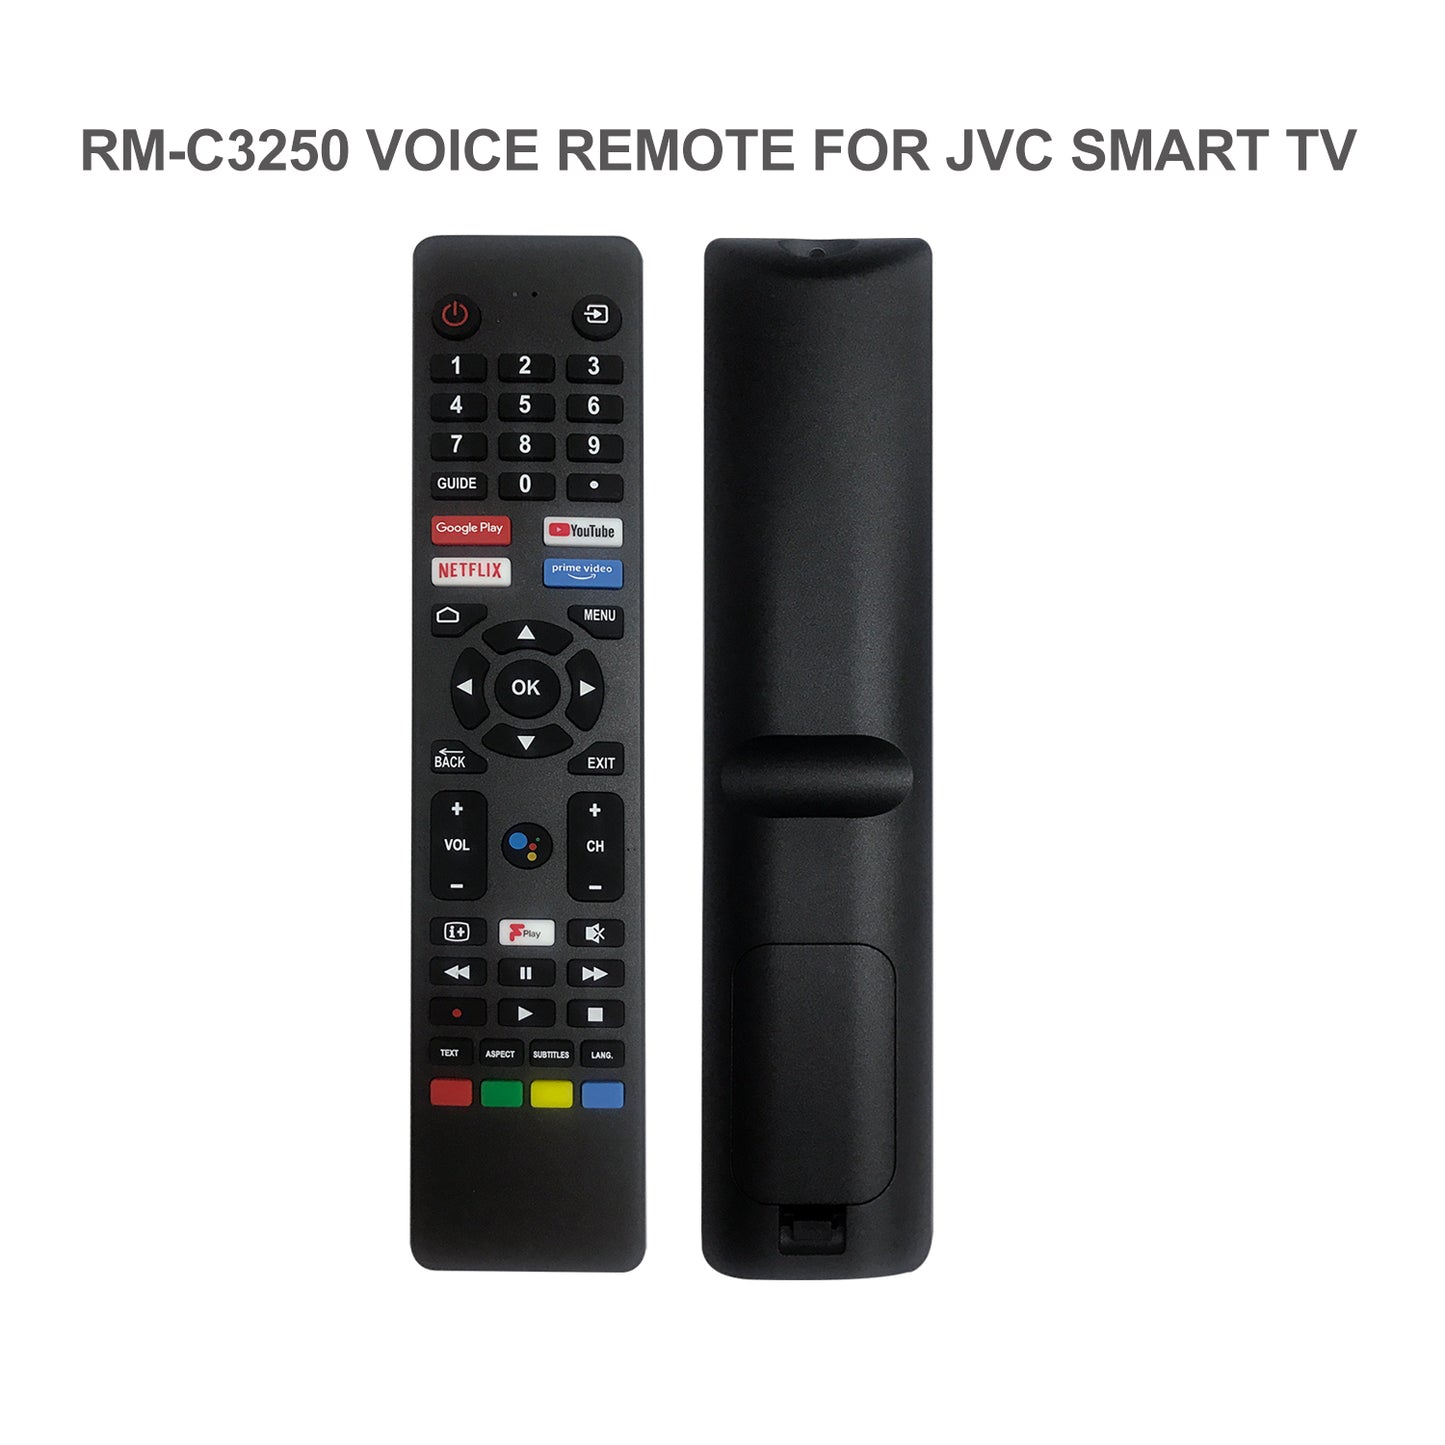 JCV01 C3250 TV Remote Control For JVC and Polaroid TV With Voice Command Function